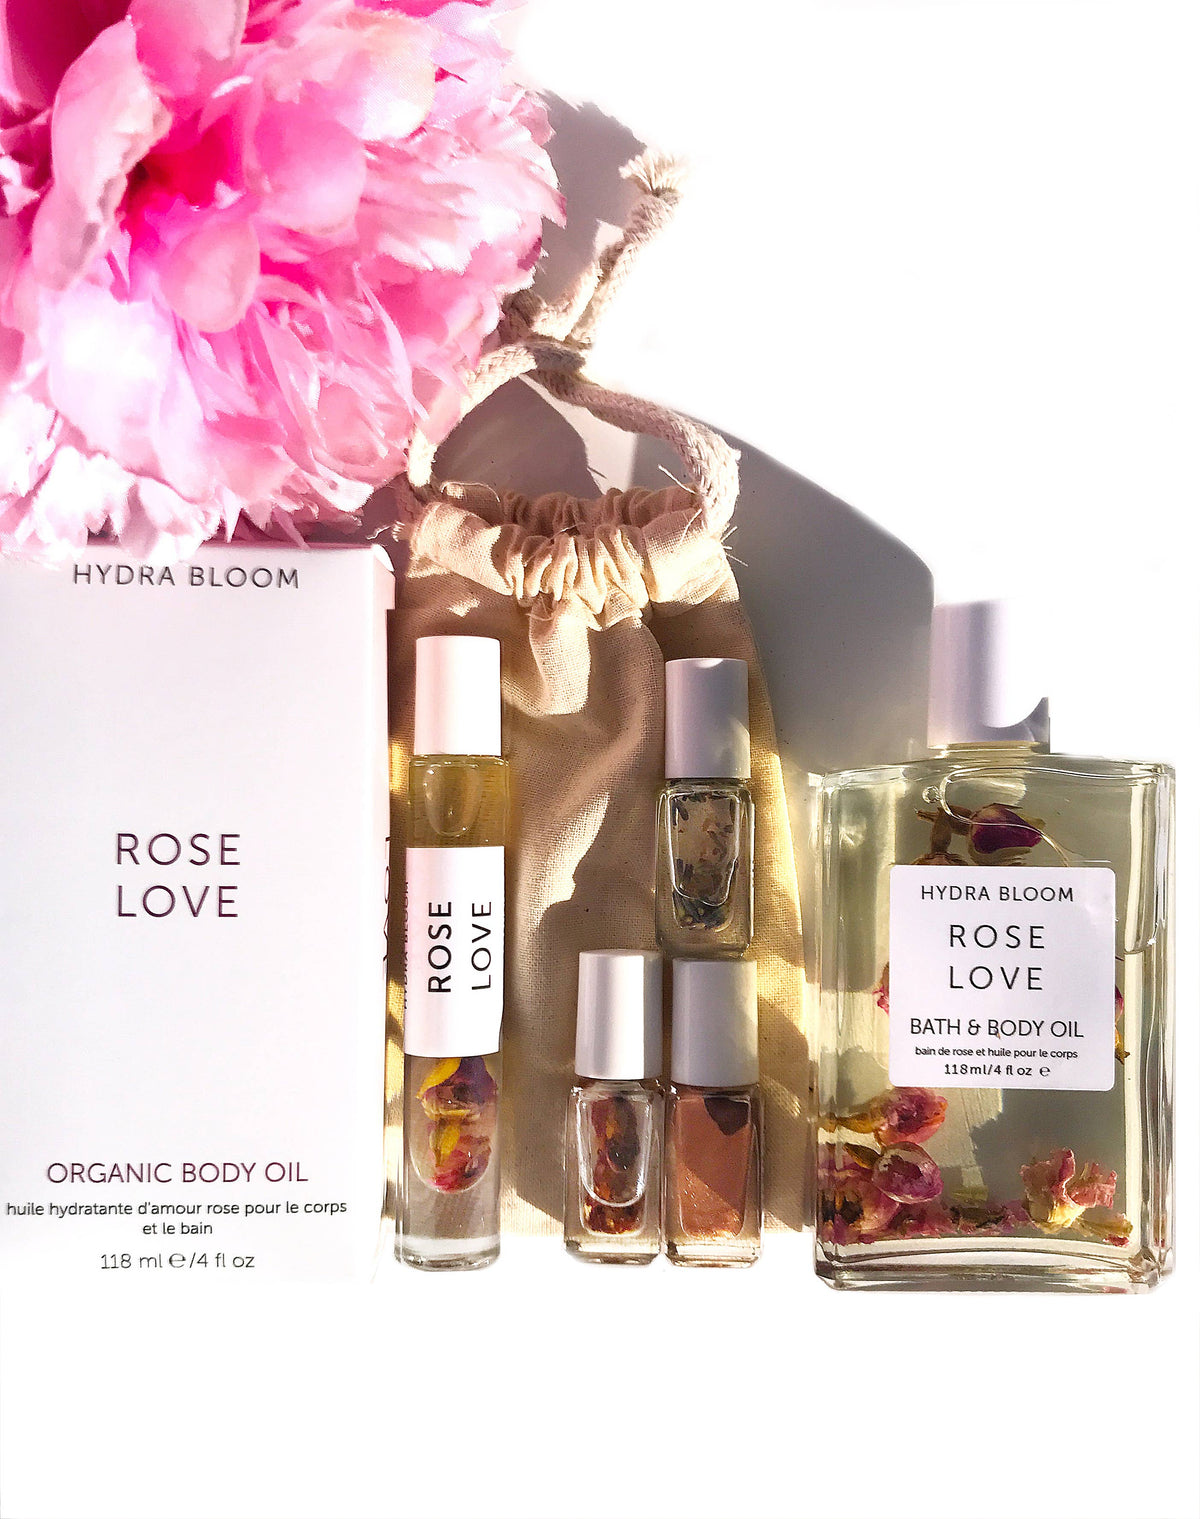 Hydra Bloom Beauty Rose Love Bath and Body Oil